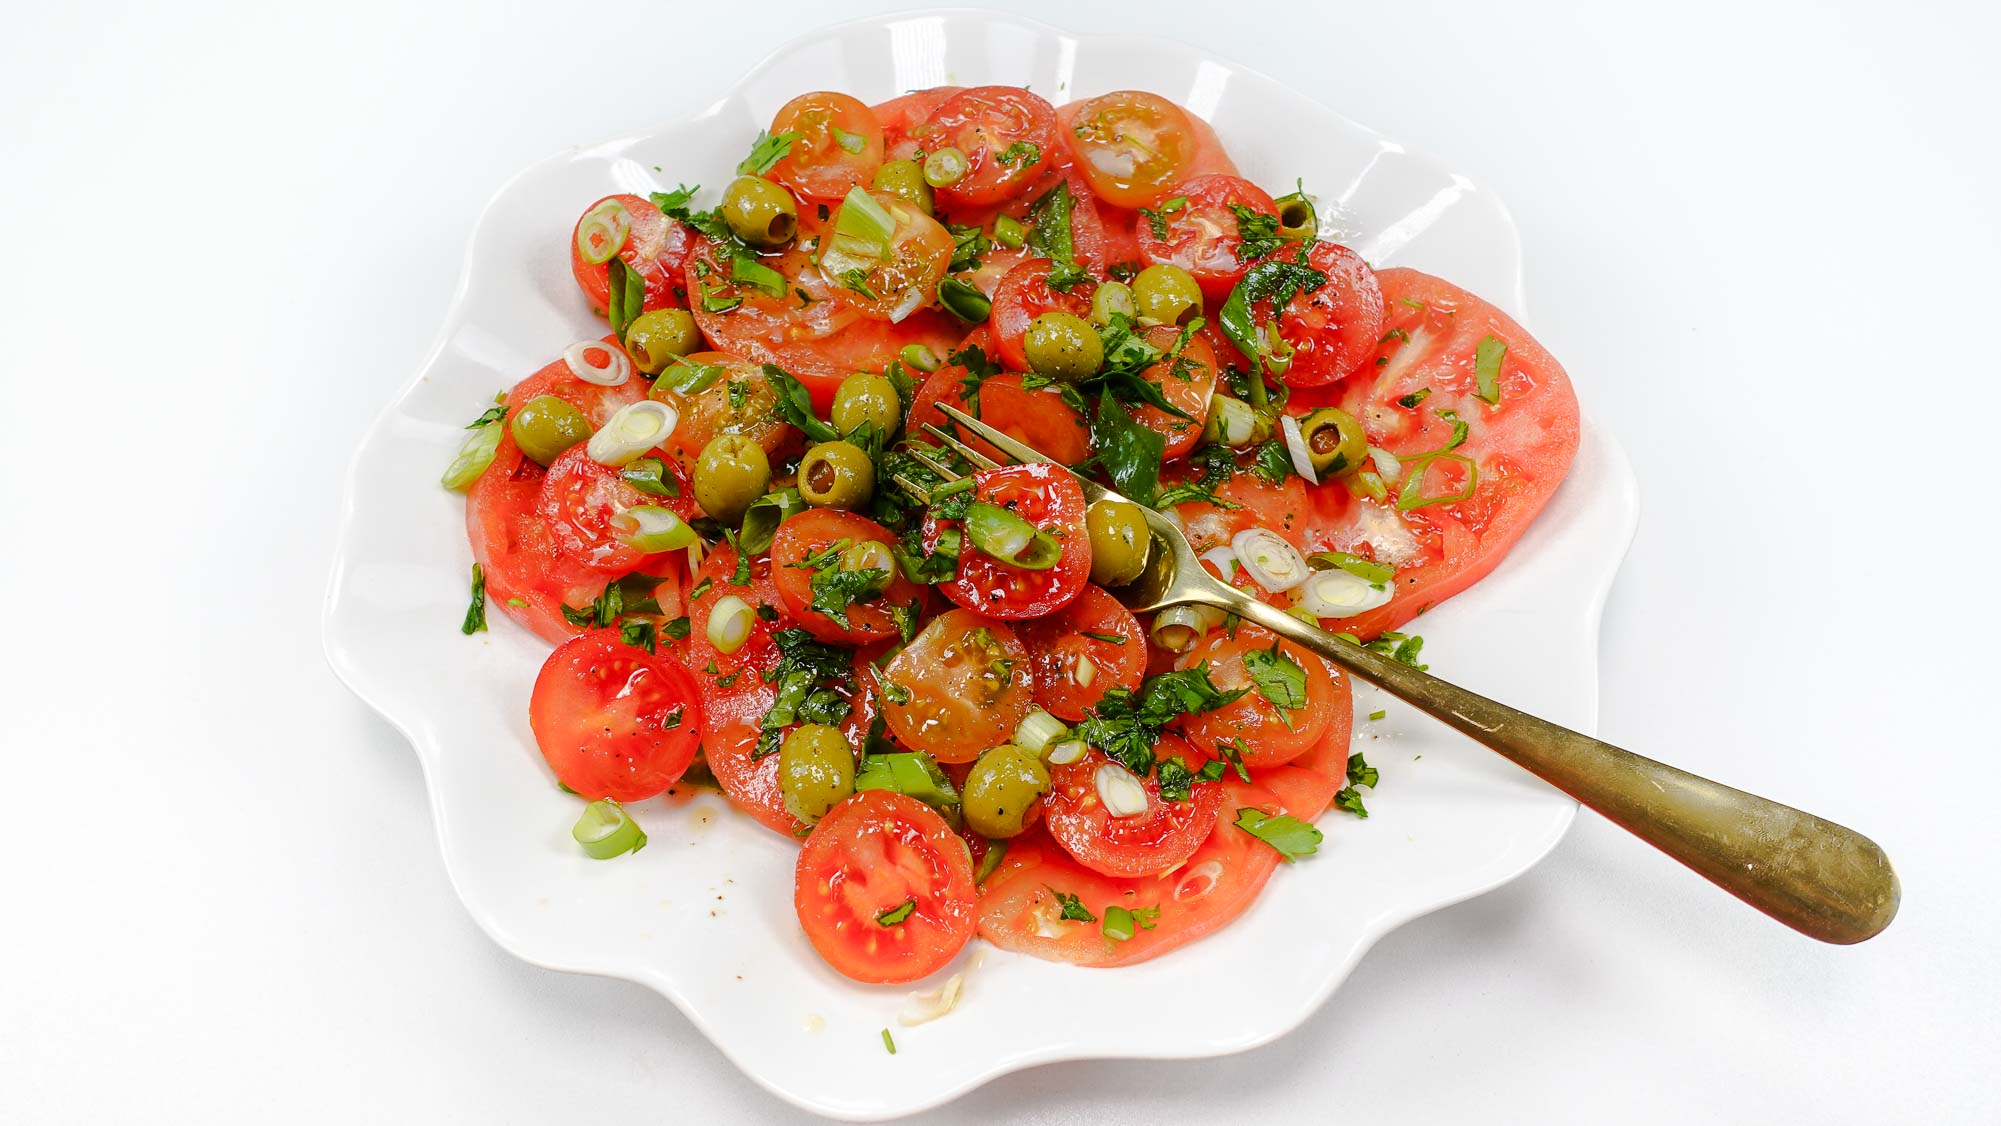 Tomato Salad with olives on a white plate.